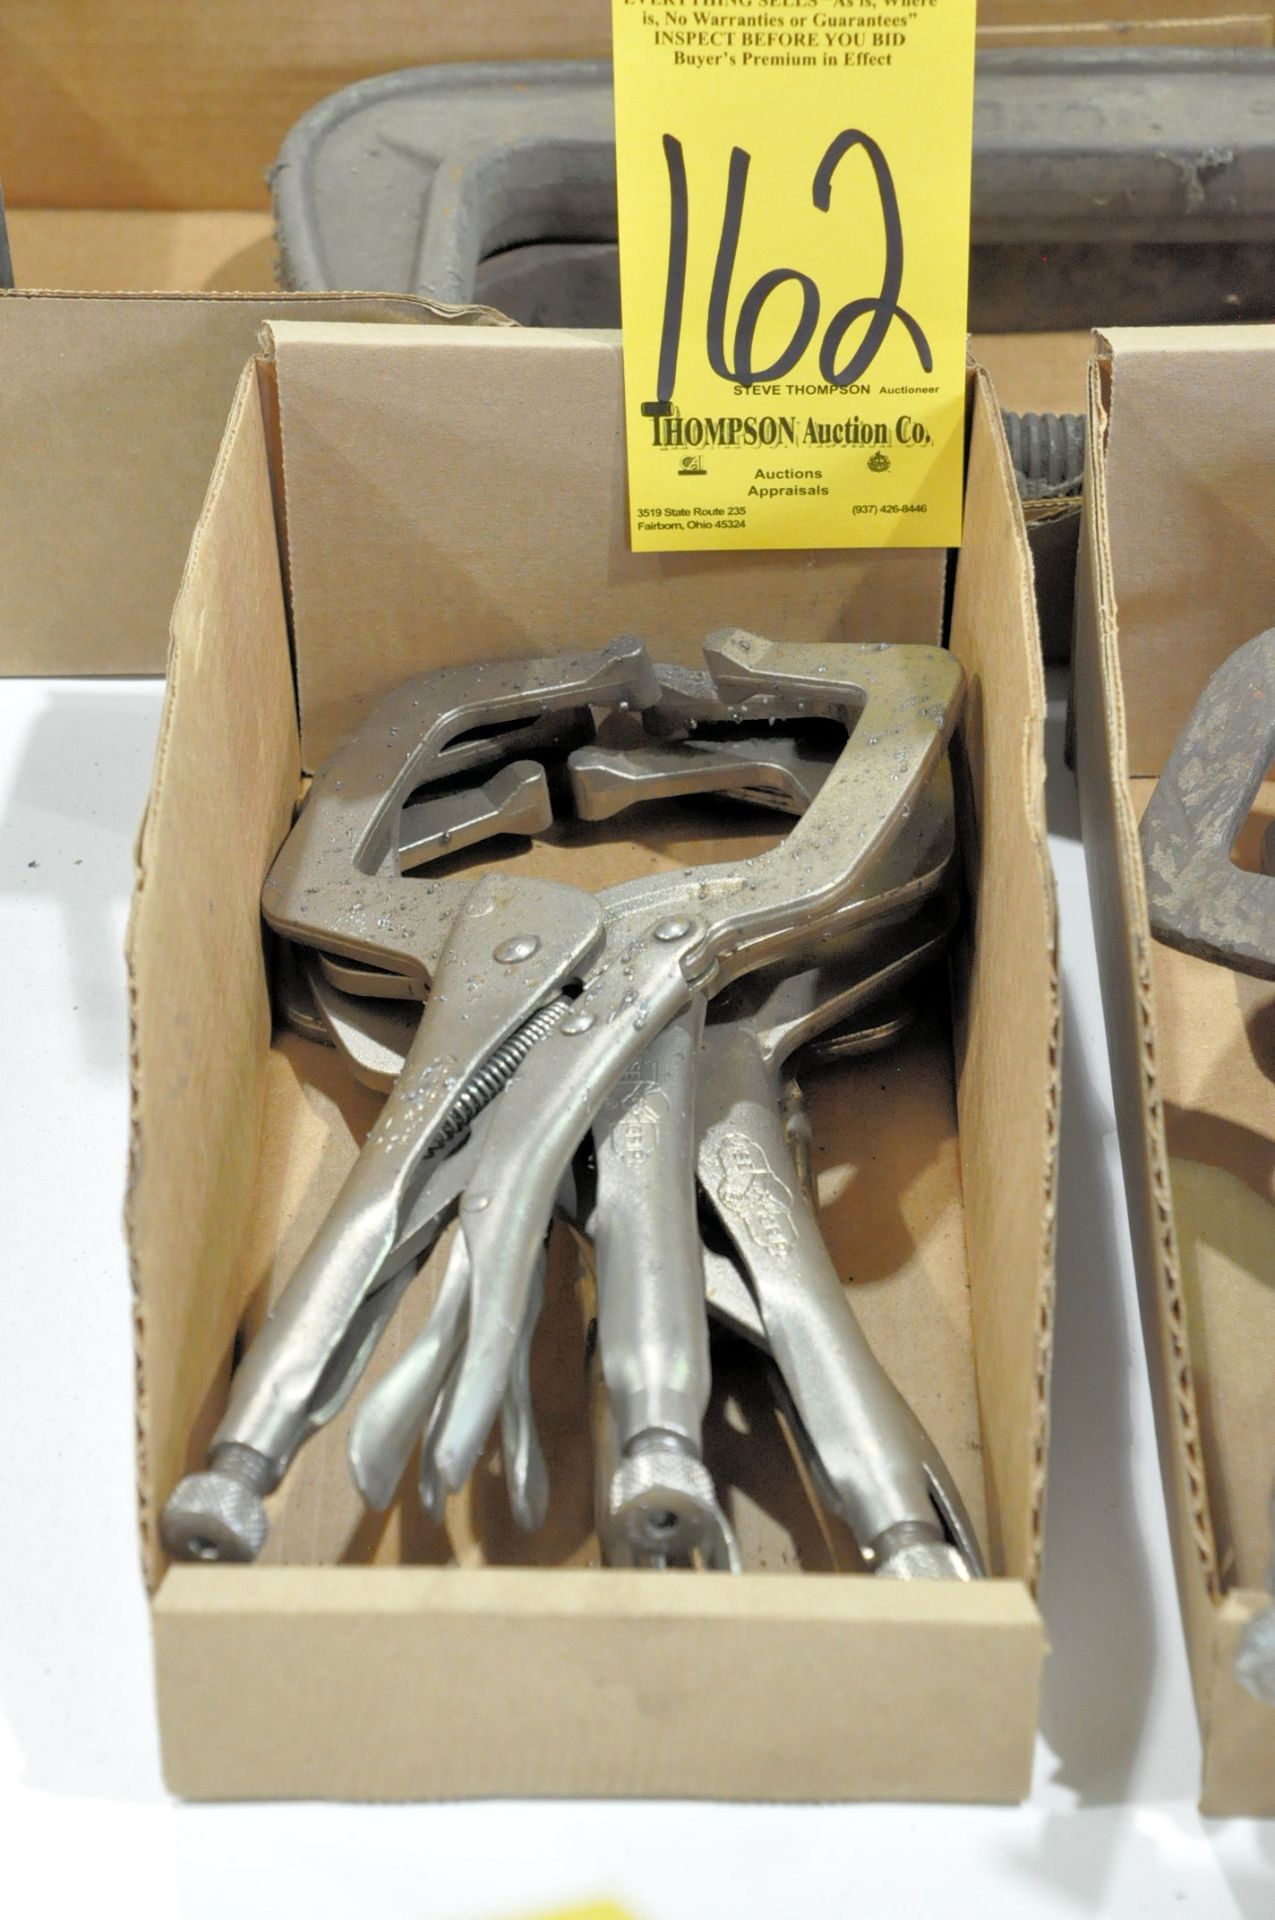 Lot-(4) Pairs Vise Grip Welding Clamps in (1) Box